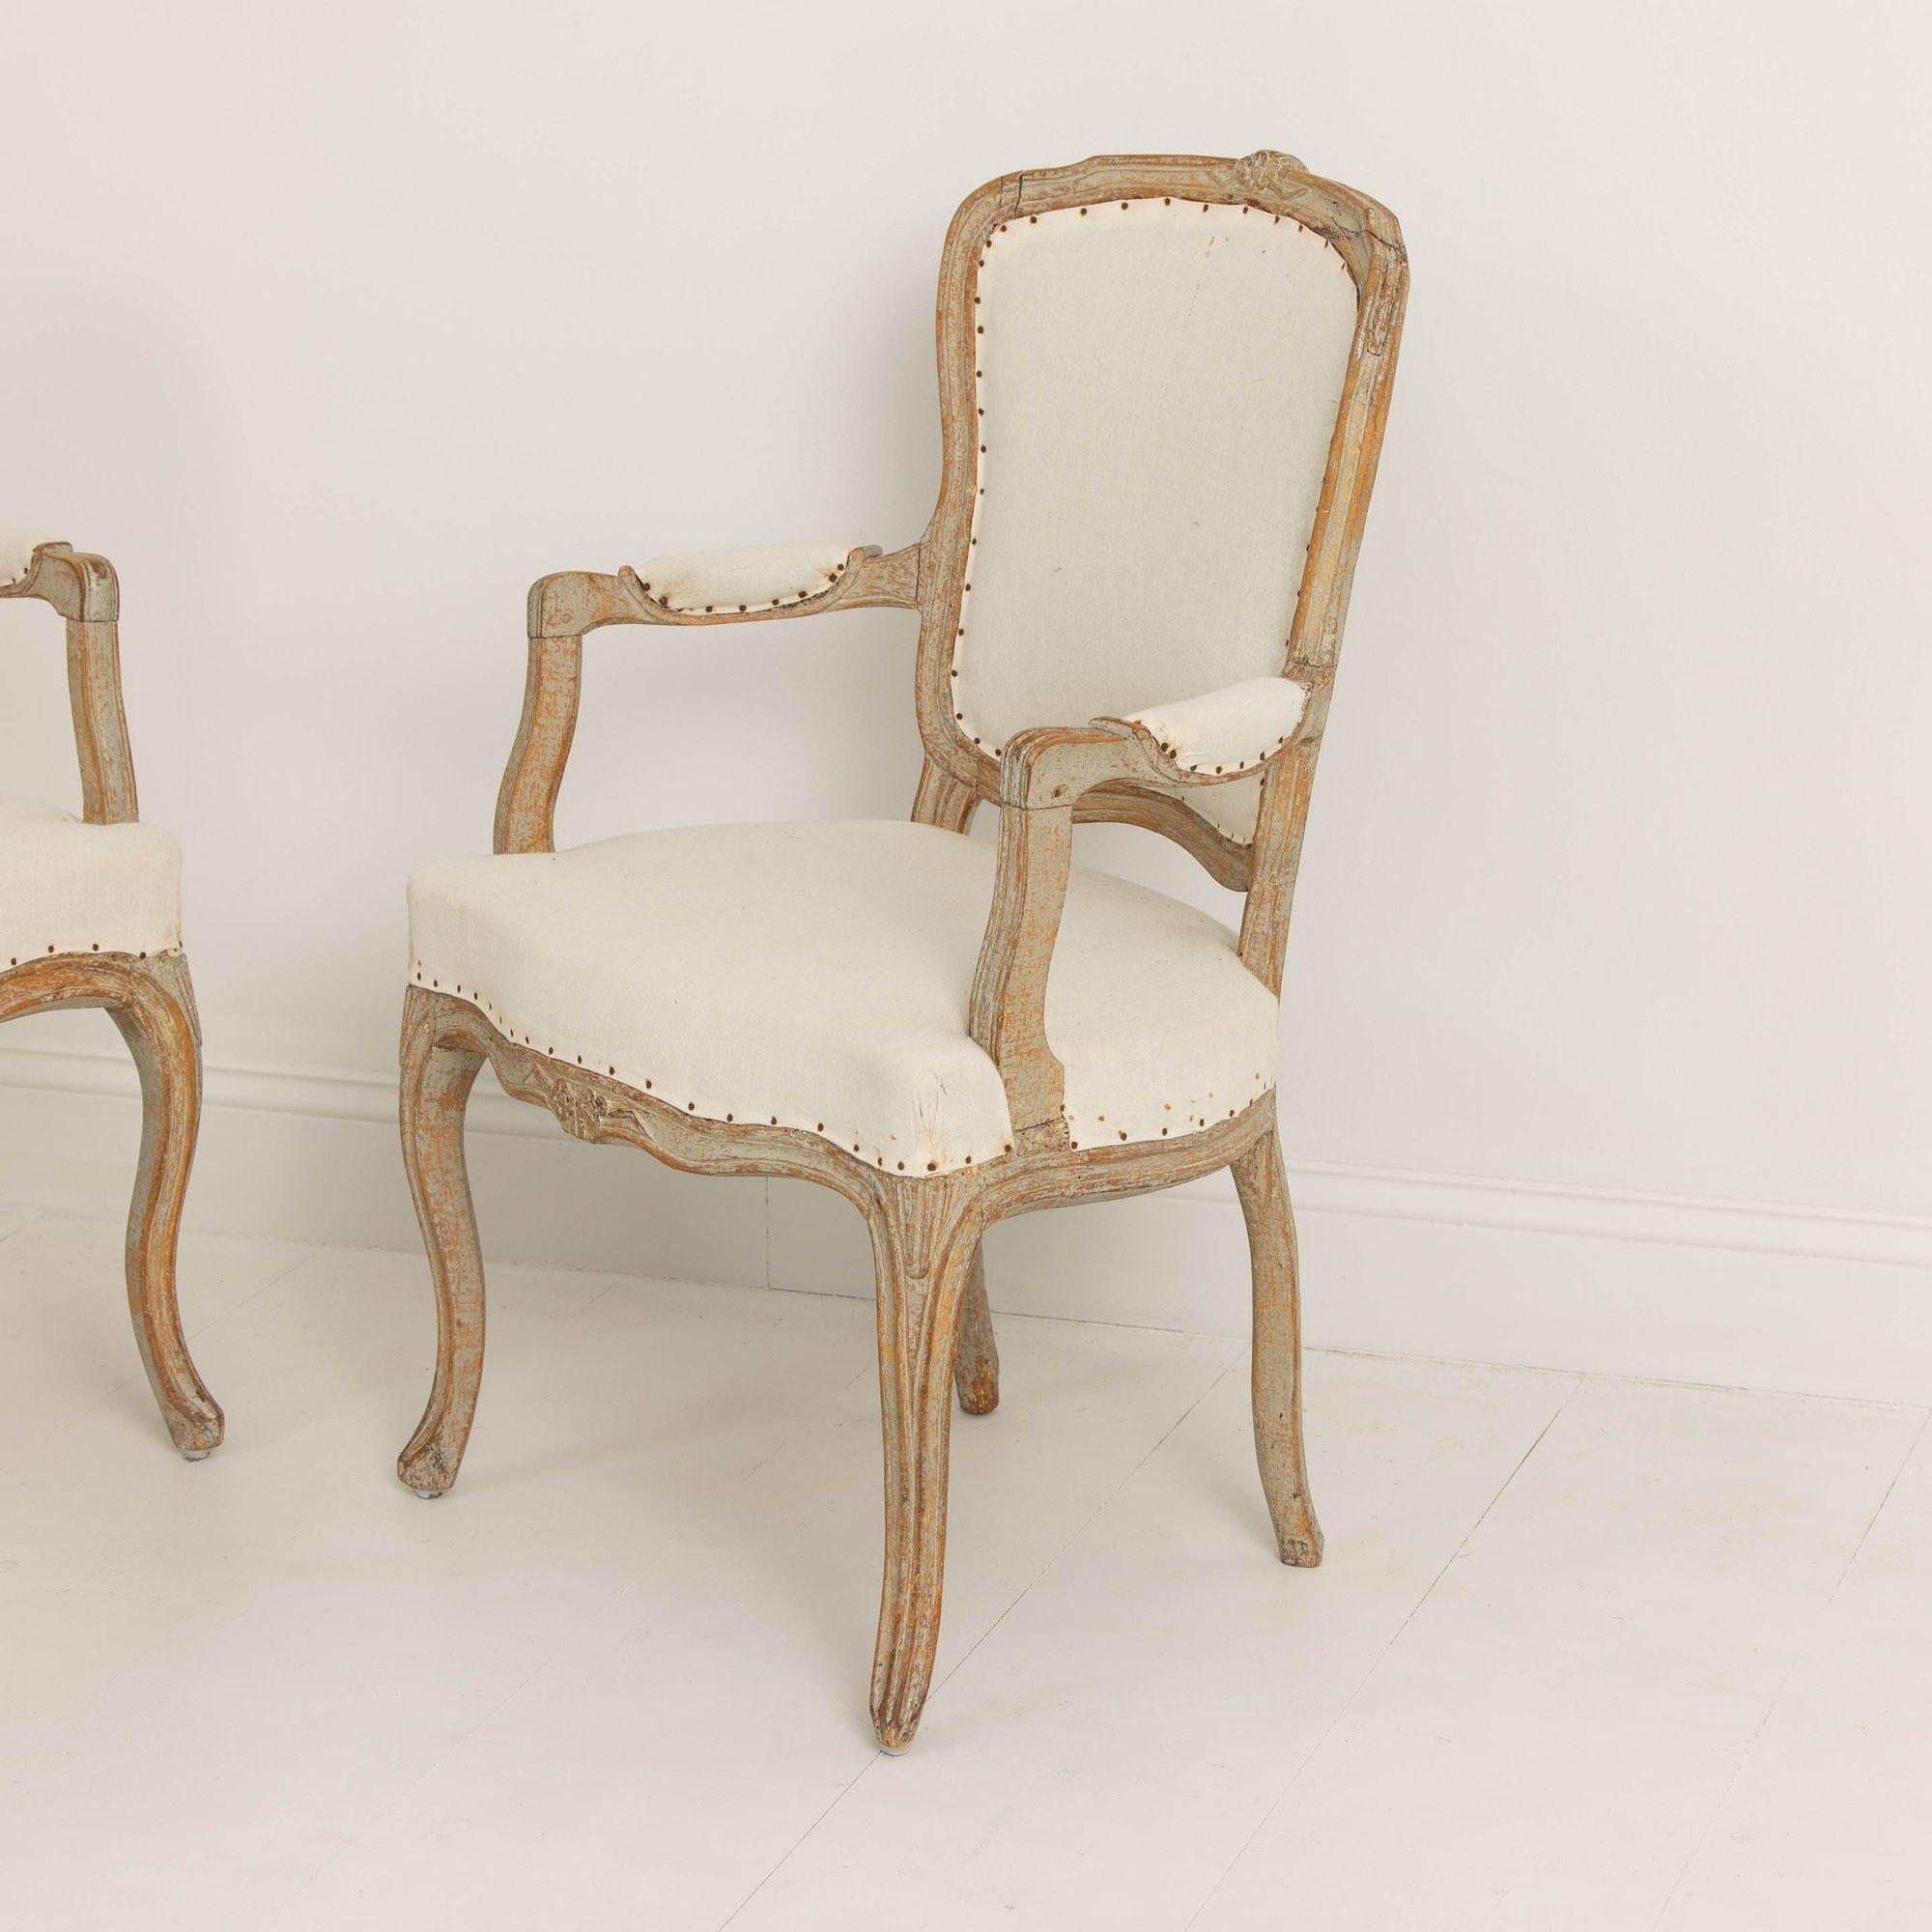 Hand-Carved Pair of 18th c. Swedish Rococo Period Armchairs in Original Paint 